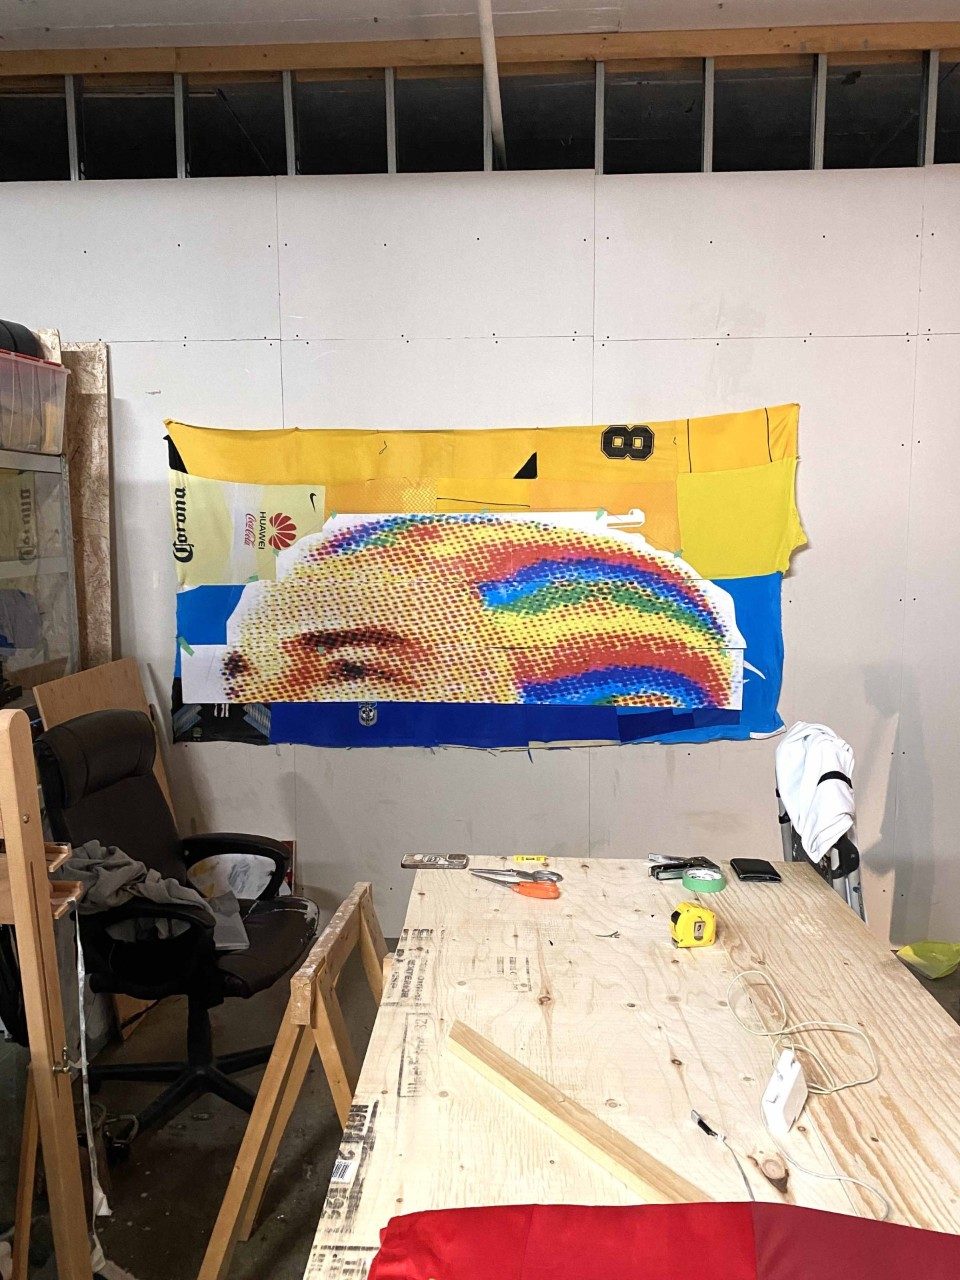 Studio shot, the artwork is visible in the background, patchwork of colorful sports jersey with a low quality impression of the reggaeton singer J Balvin, wearing multicolor cornrows